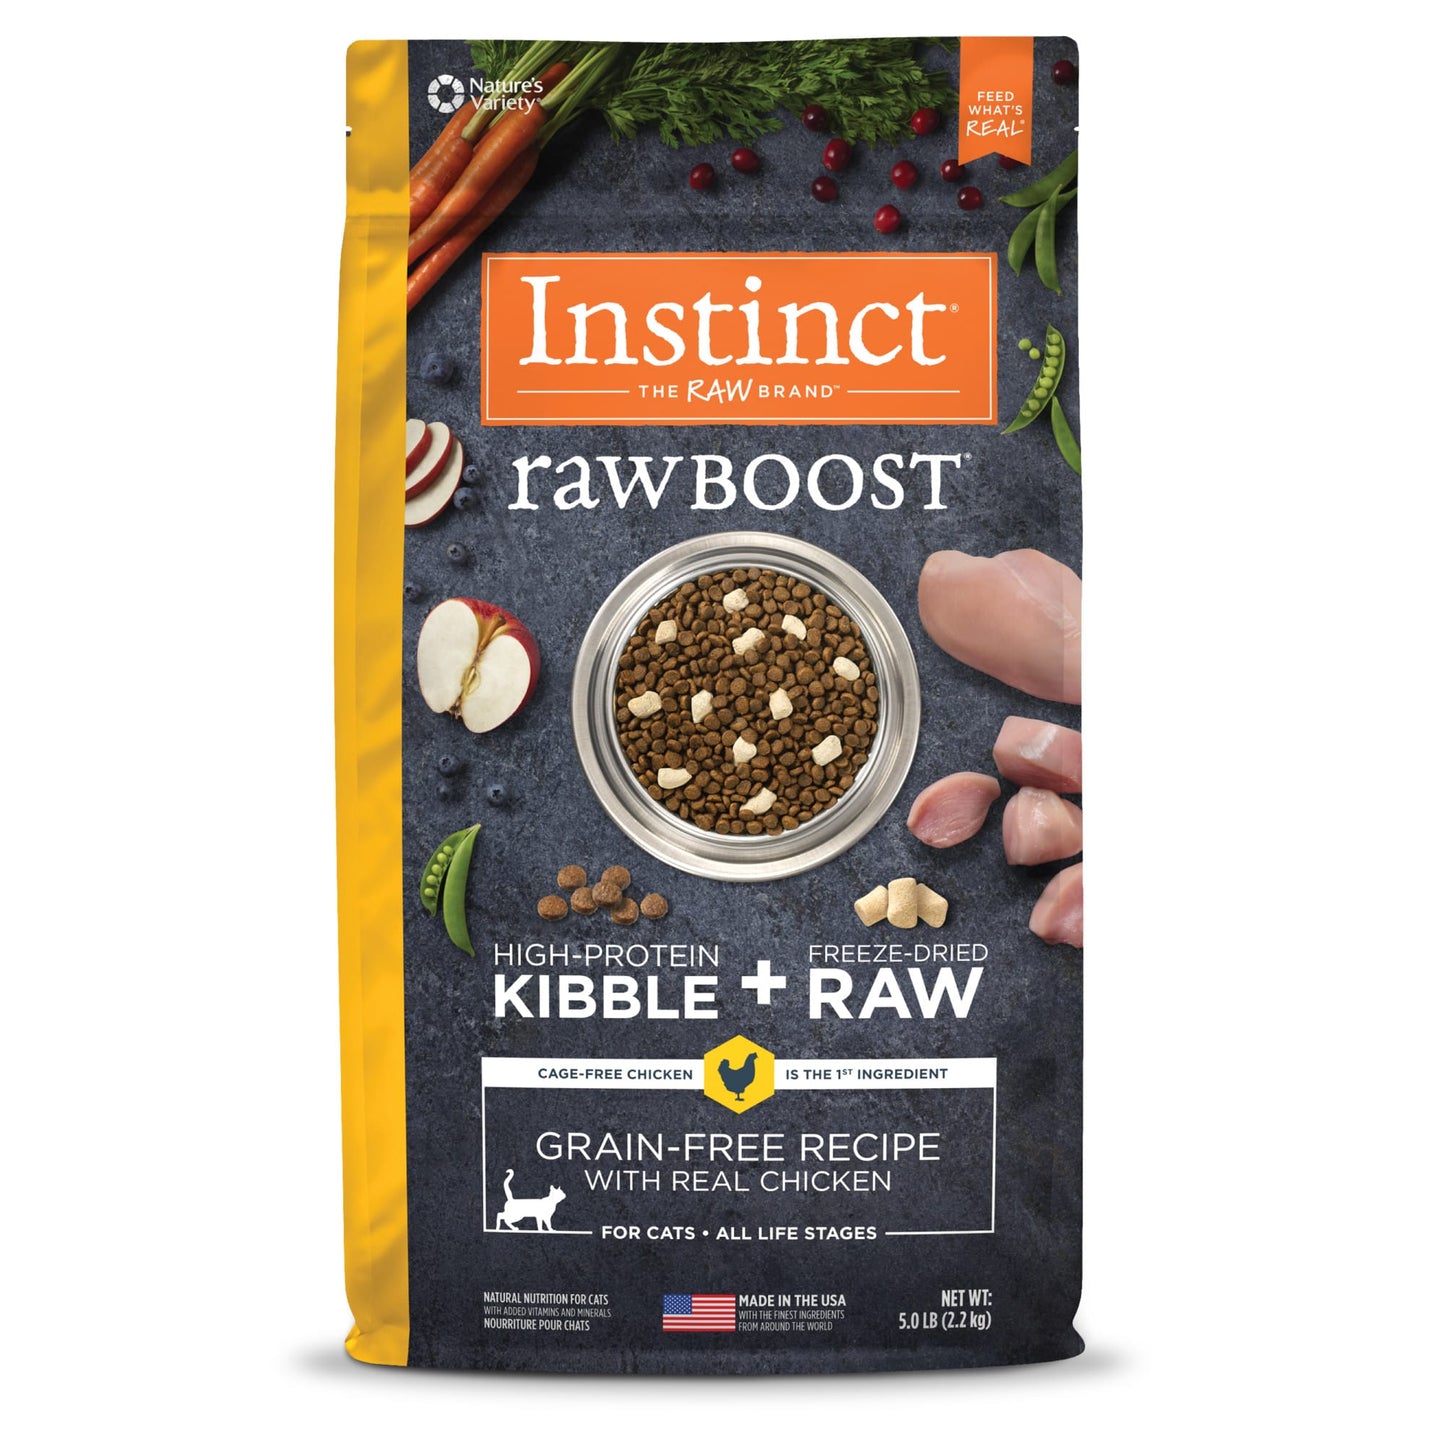 Nature's Variety Instinct Raw Boost Grain-Free Chicken Meal Formula Dry Cat Food, 5.1 lb